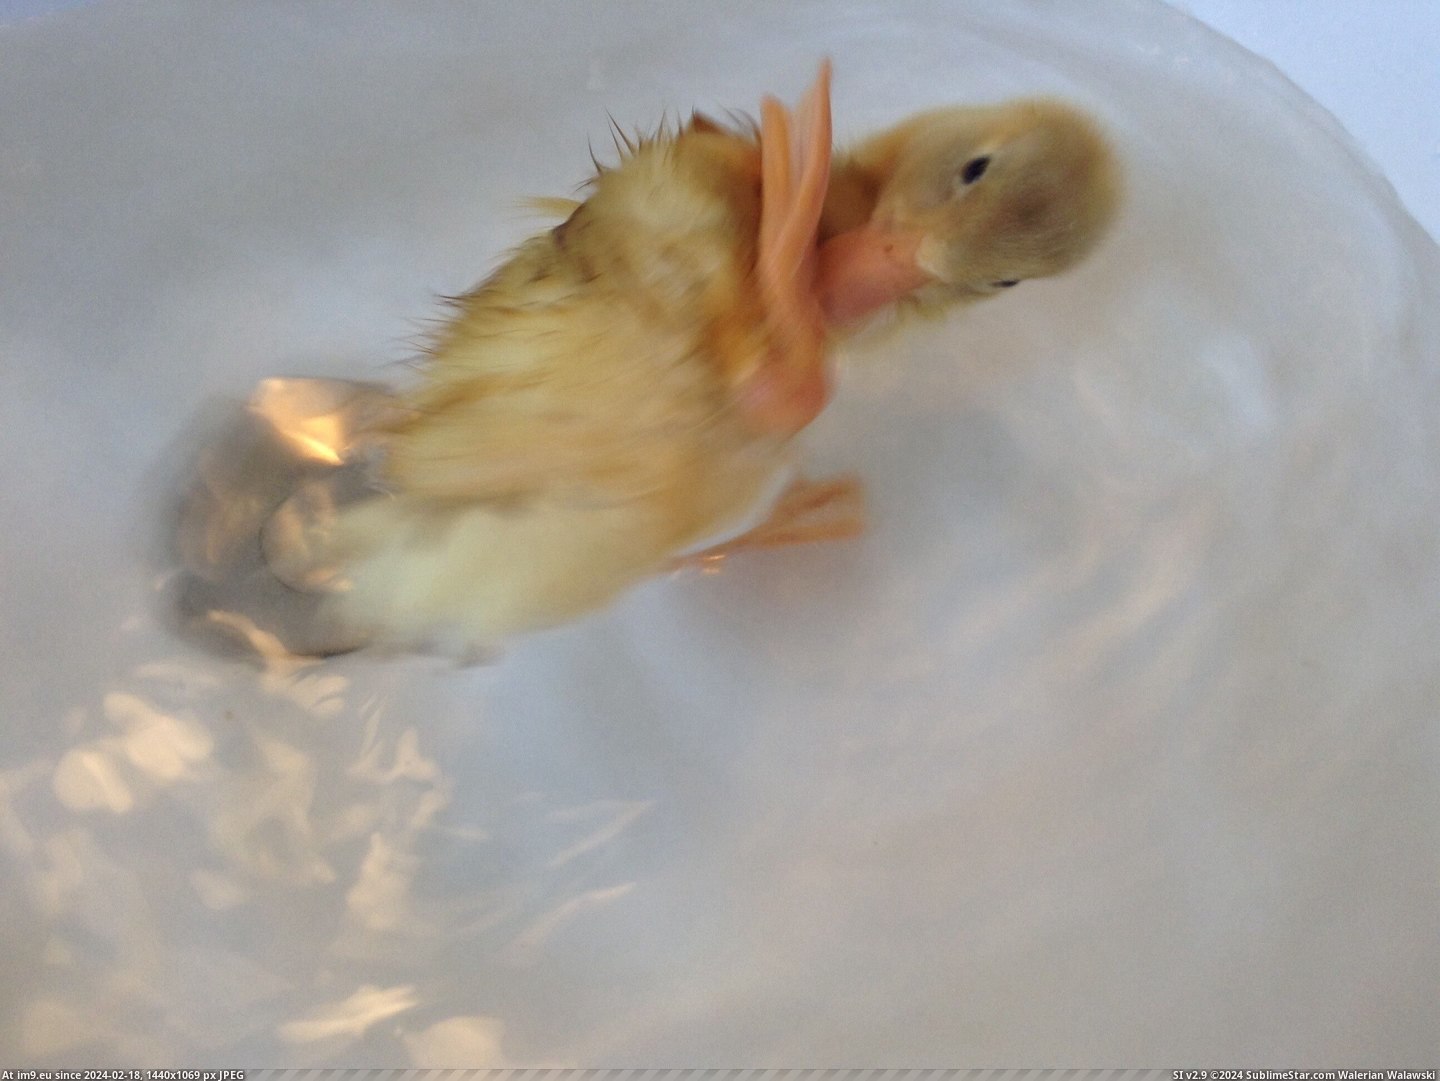 #Baby #Duck #Popularity #Excited #Stanley [Aww] My baby duck Stanley was excited for all the popularity, so here are some more pictures! 3 Pic. (Bild von album My r/AWW favs))